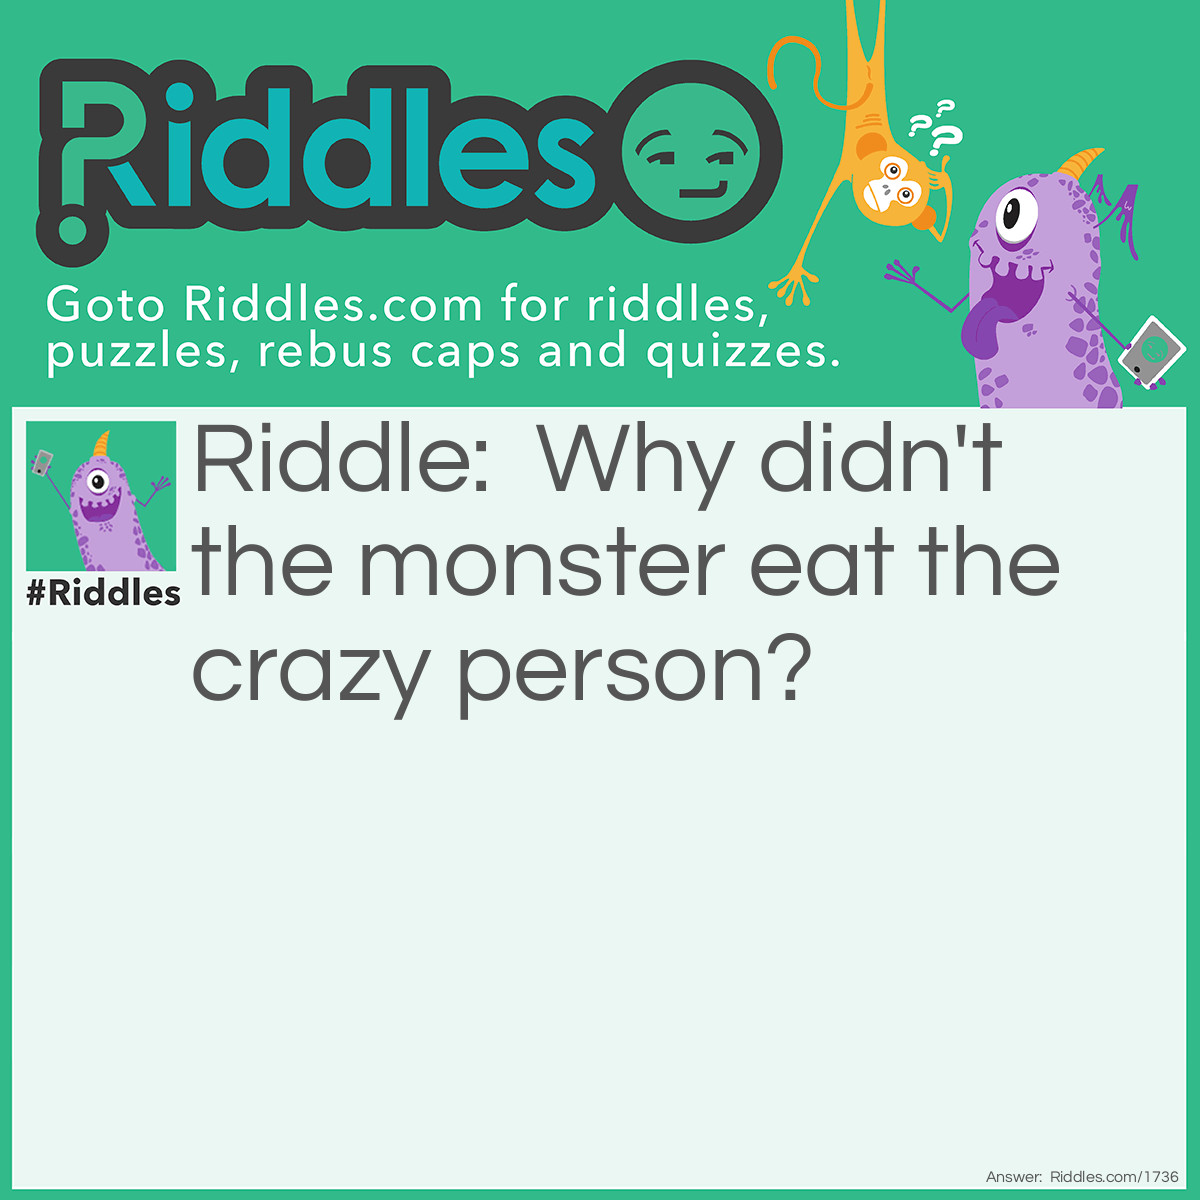 Riddle: Why didn't the monster eat the crazy person? Answer: He was allergic to nuts.